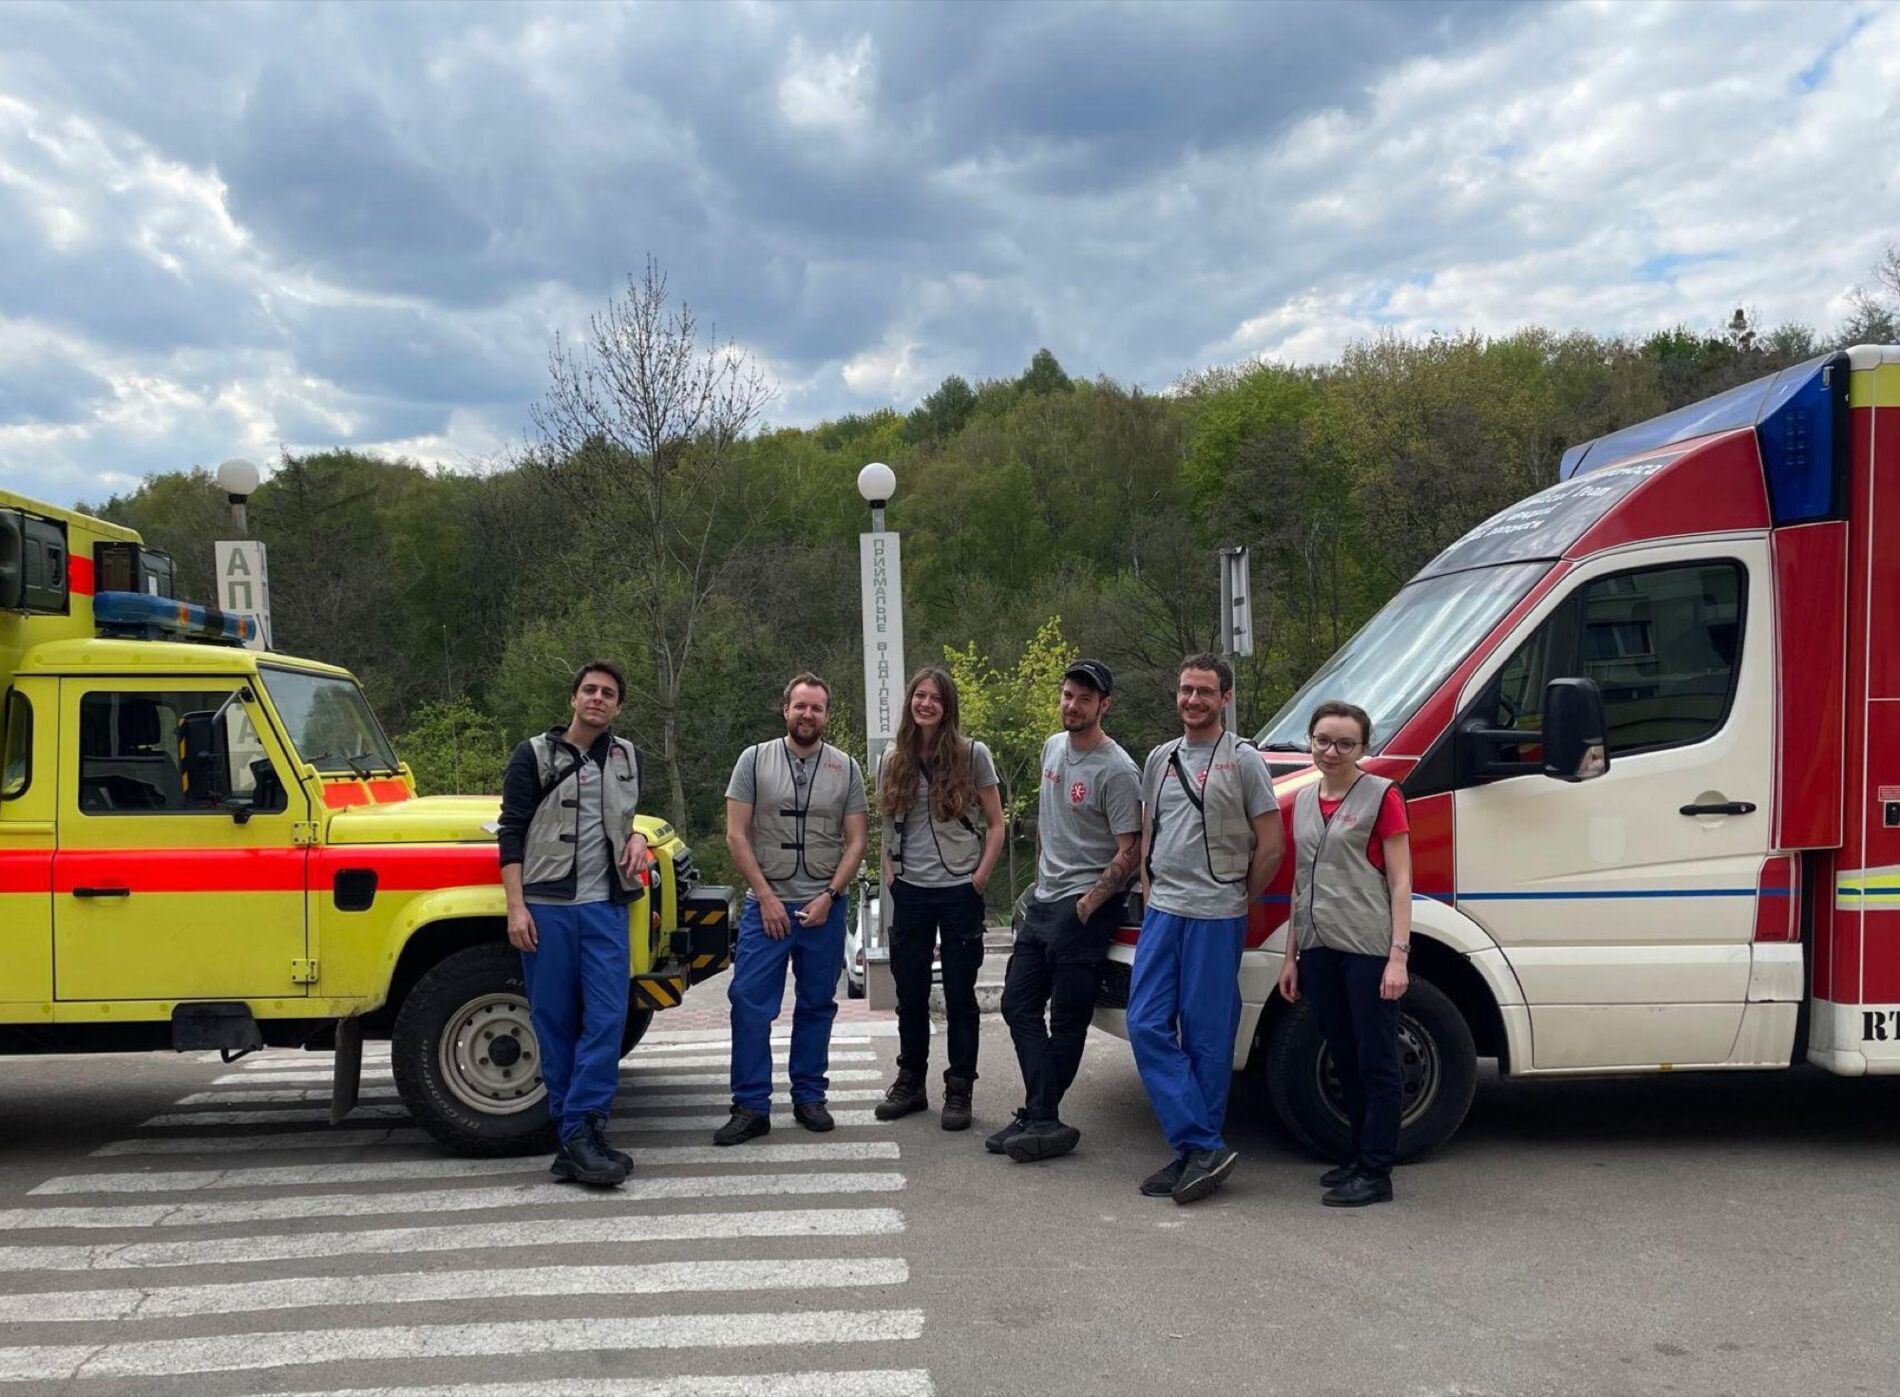 A team of medical workers from CADUS between two ambulances.